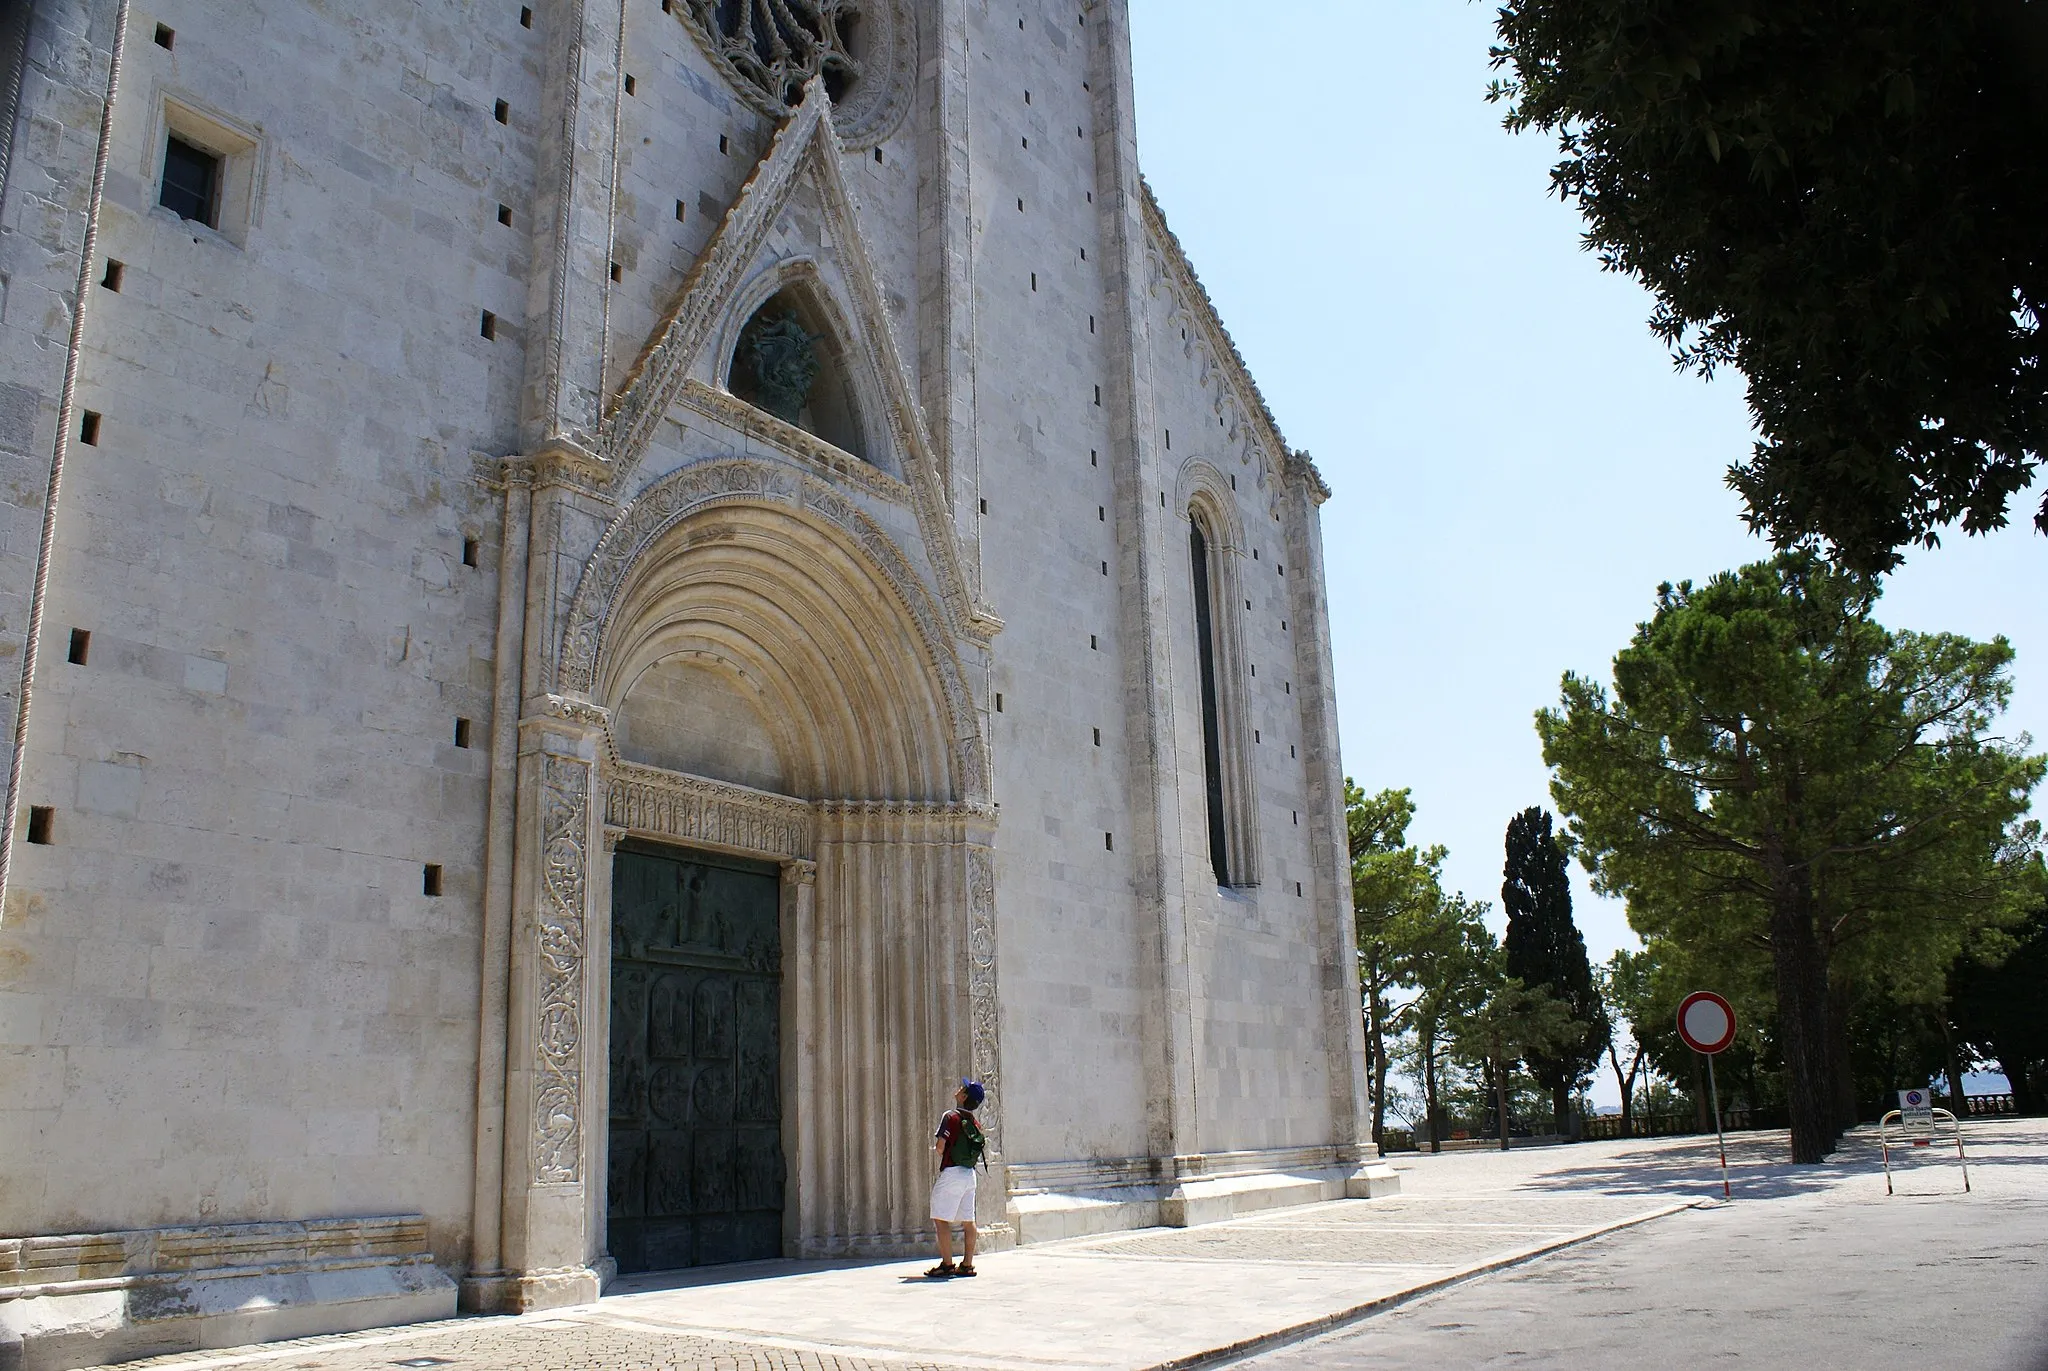 Photo showing: The cathedral of Fermo in the Marche Region of Italy.